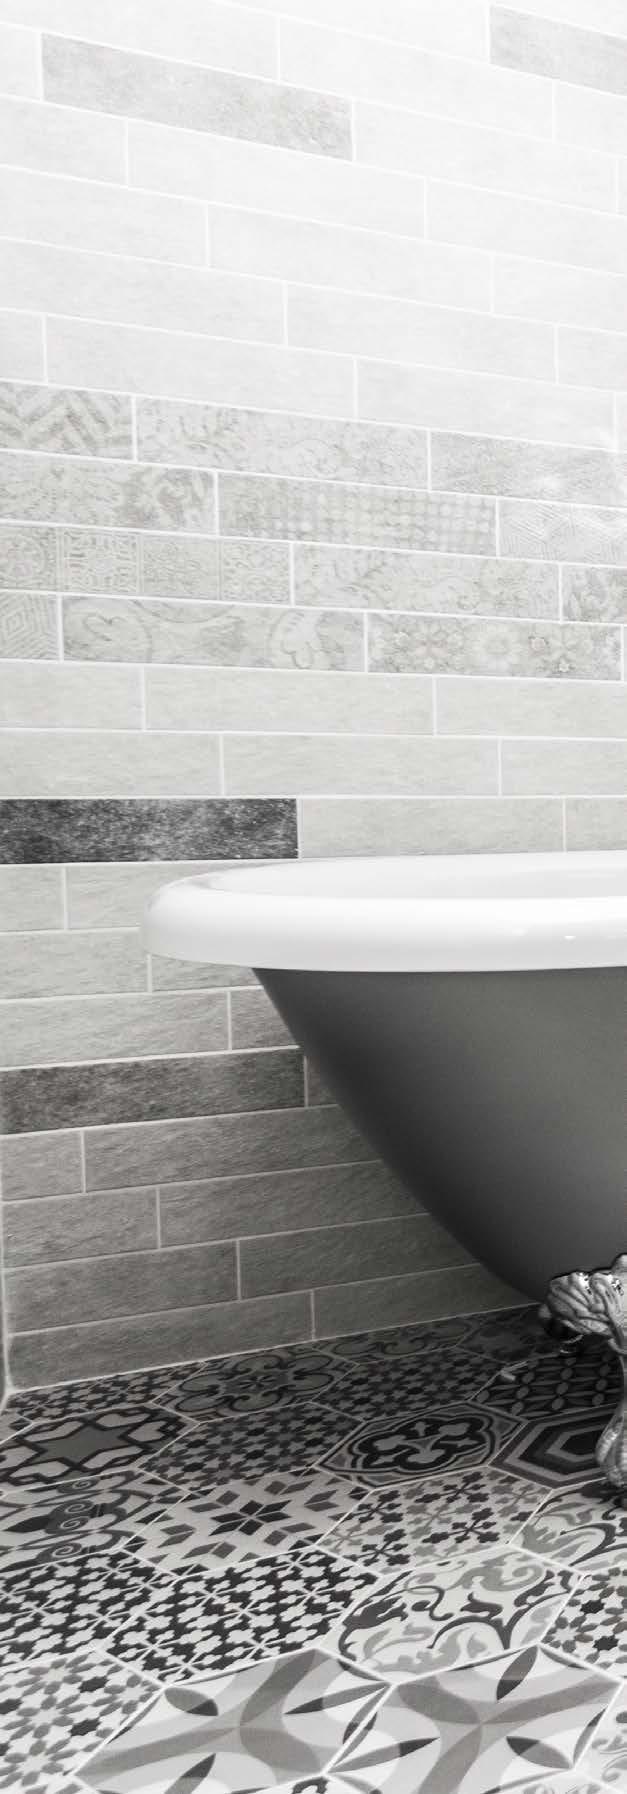 Baths have come a long way since a steel tub was placed next to a coal fire and are now considered the pinnacle of bathing luxury.